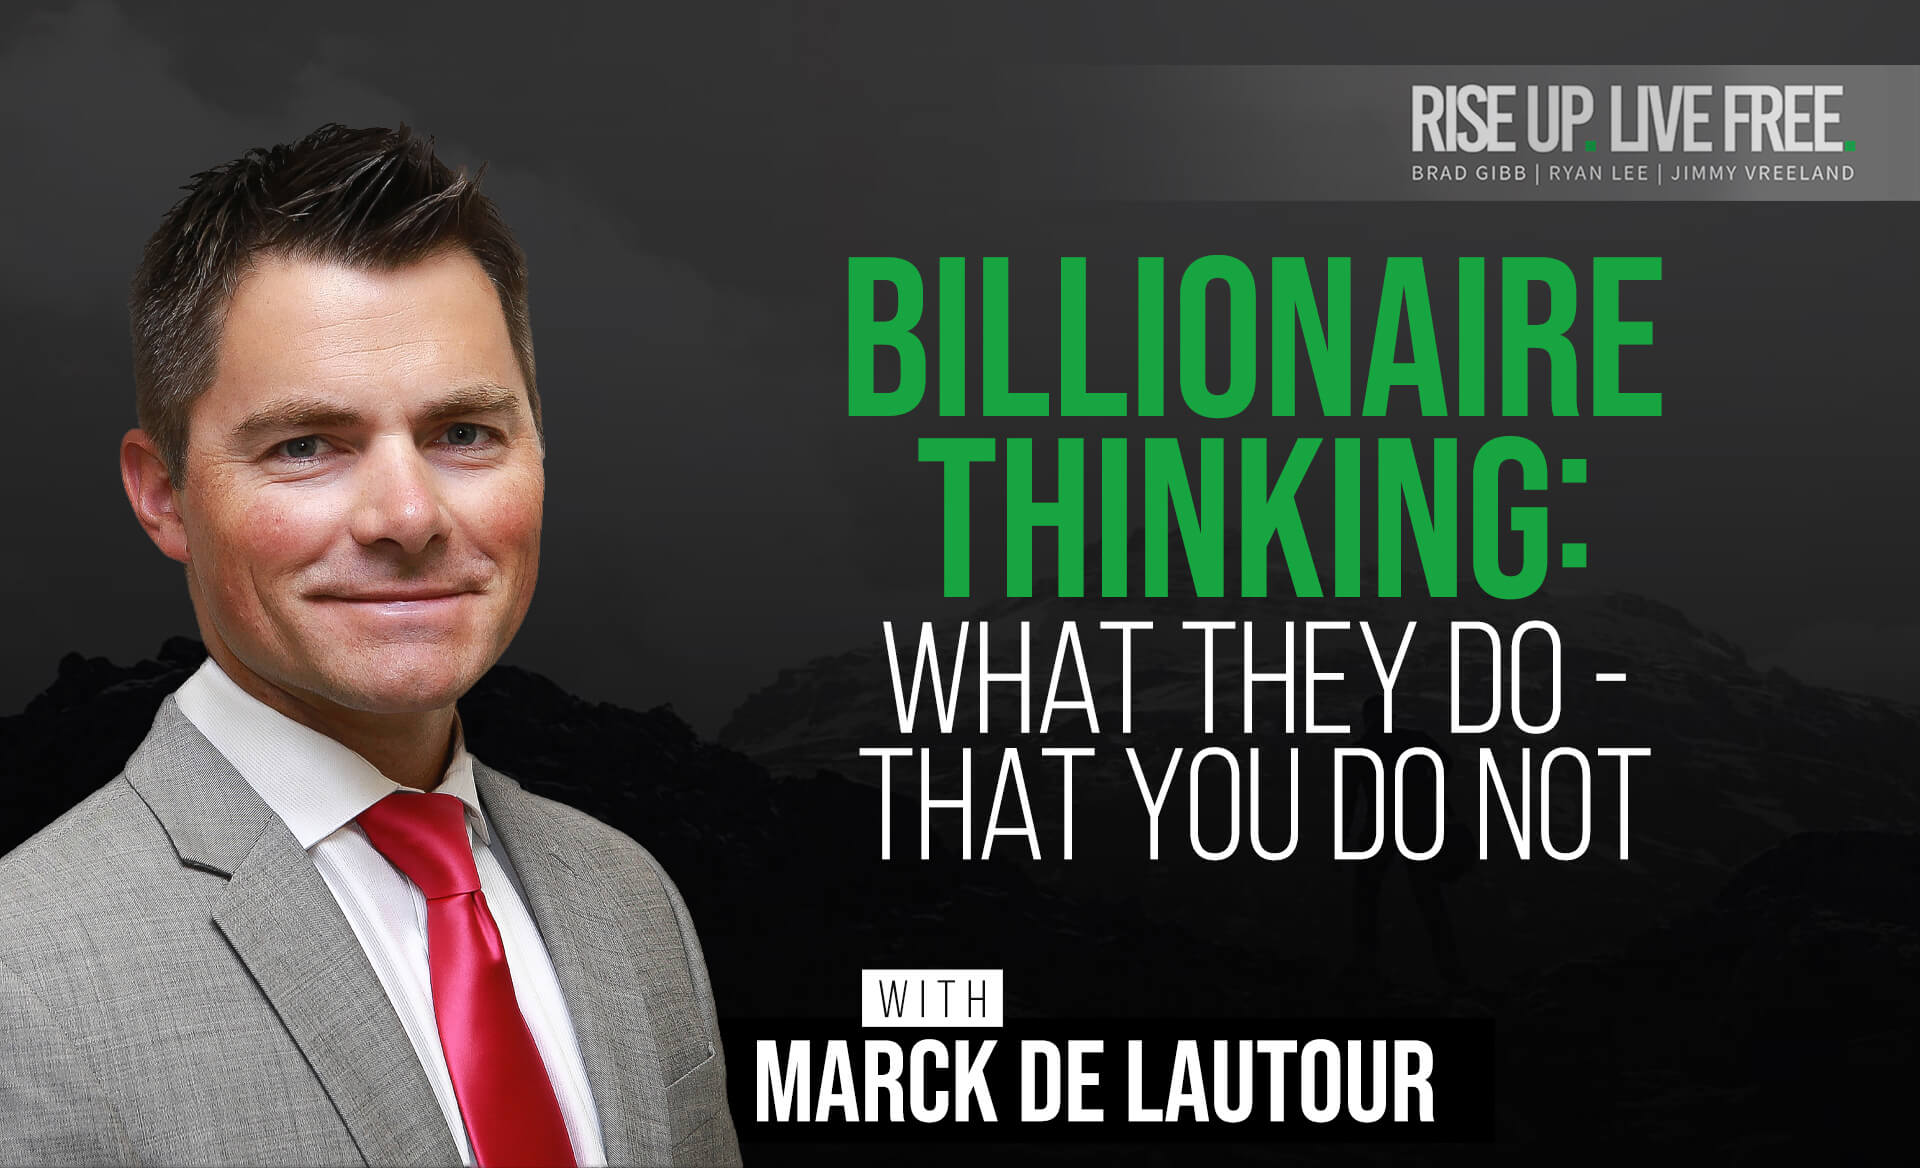 BILLIONAIRE THINKING: What They Do - That You Do Not with Marck de Lautour